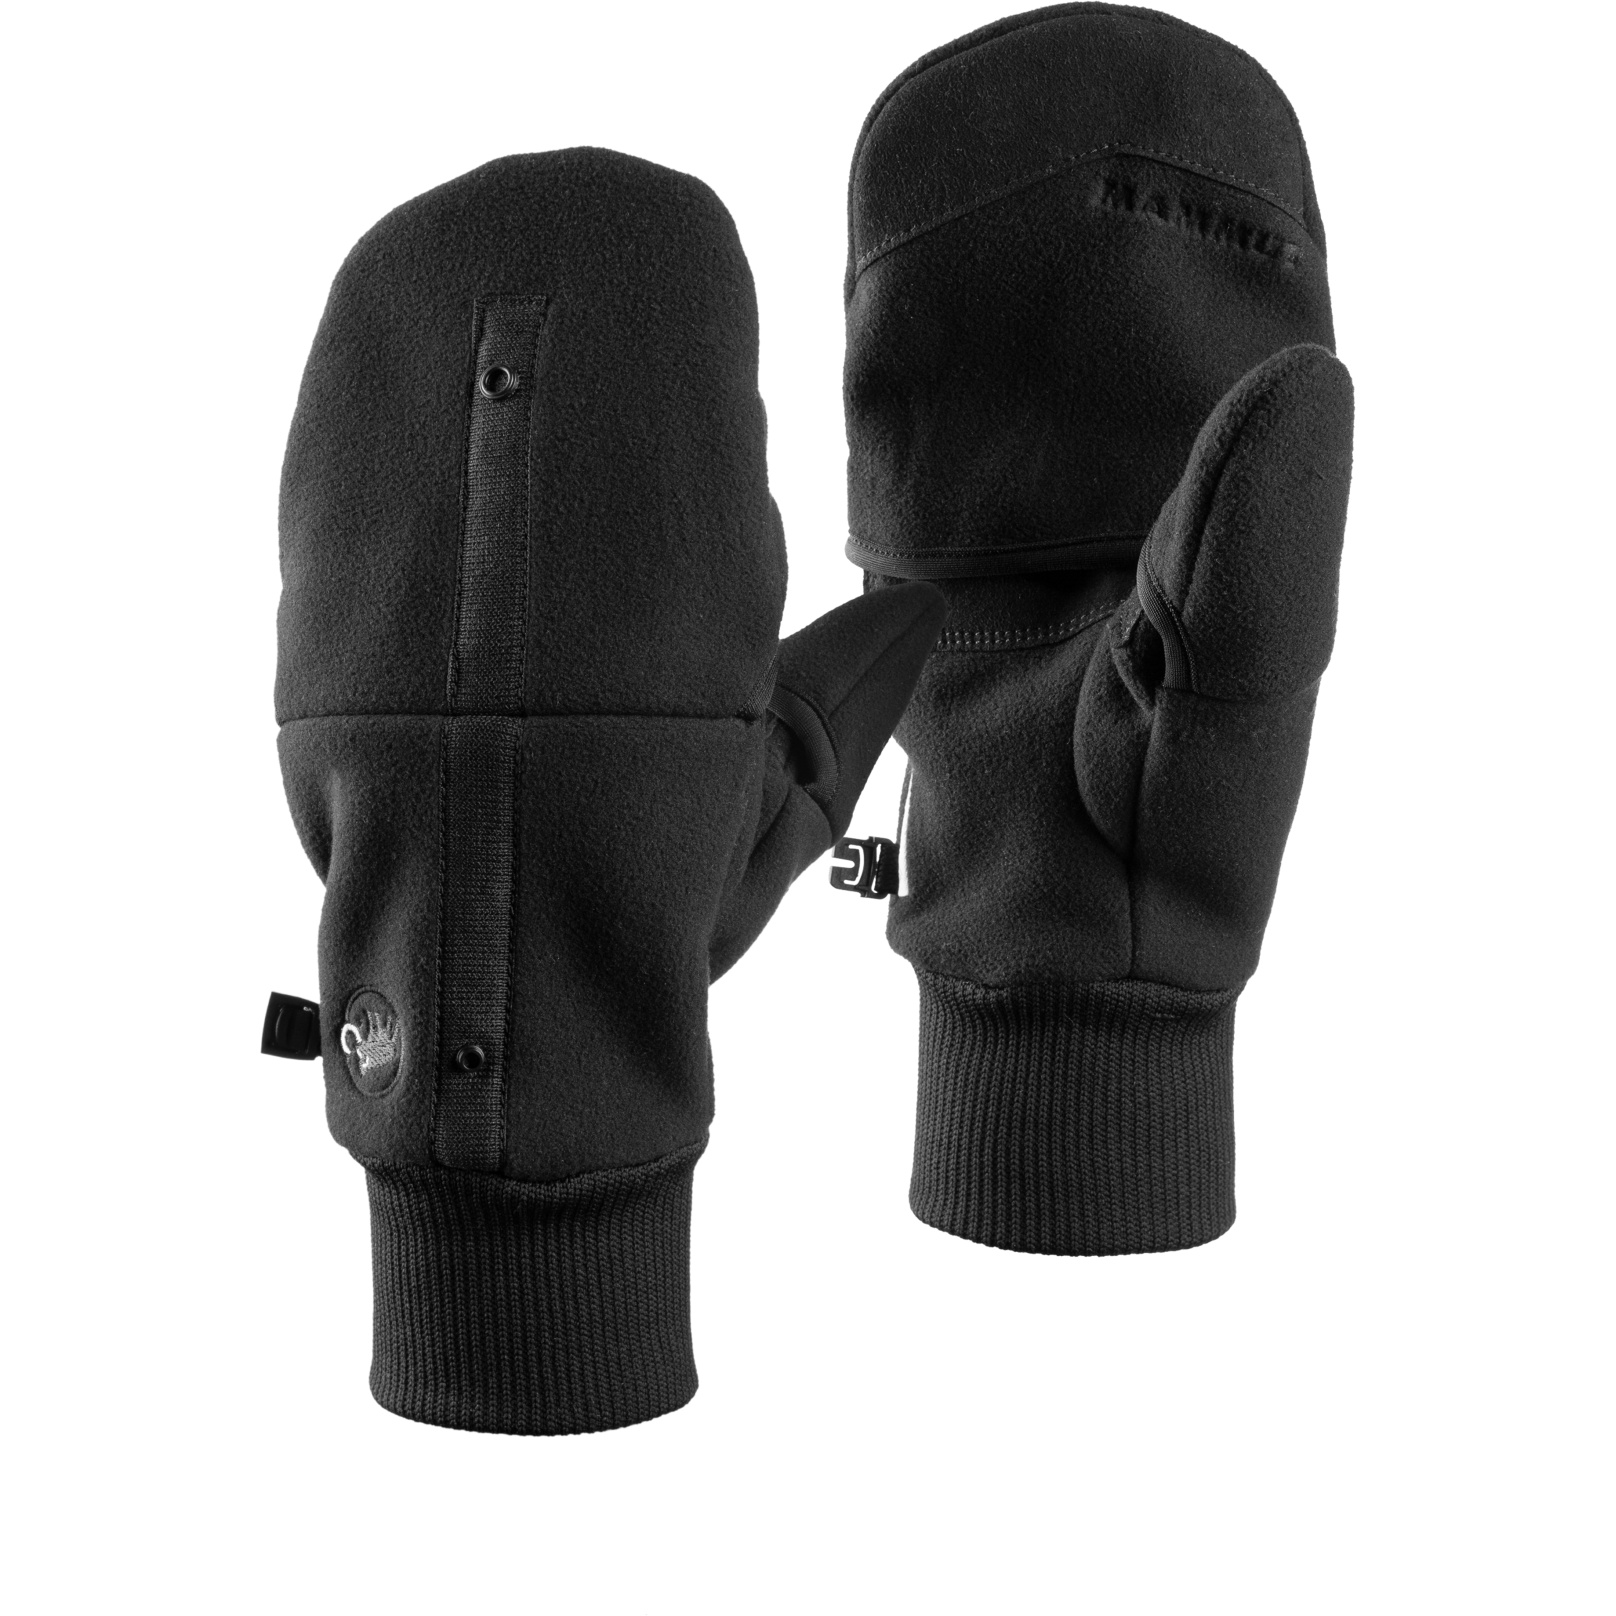 Picture of Mammut Shelter Glove Mittens - black